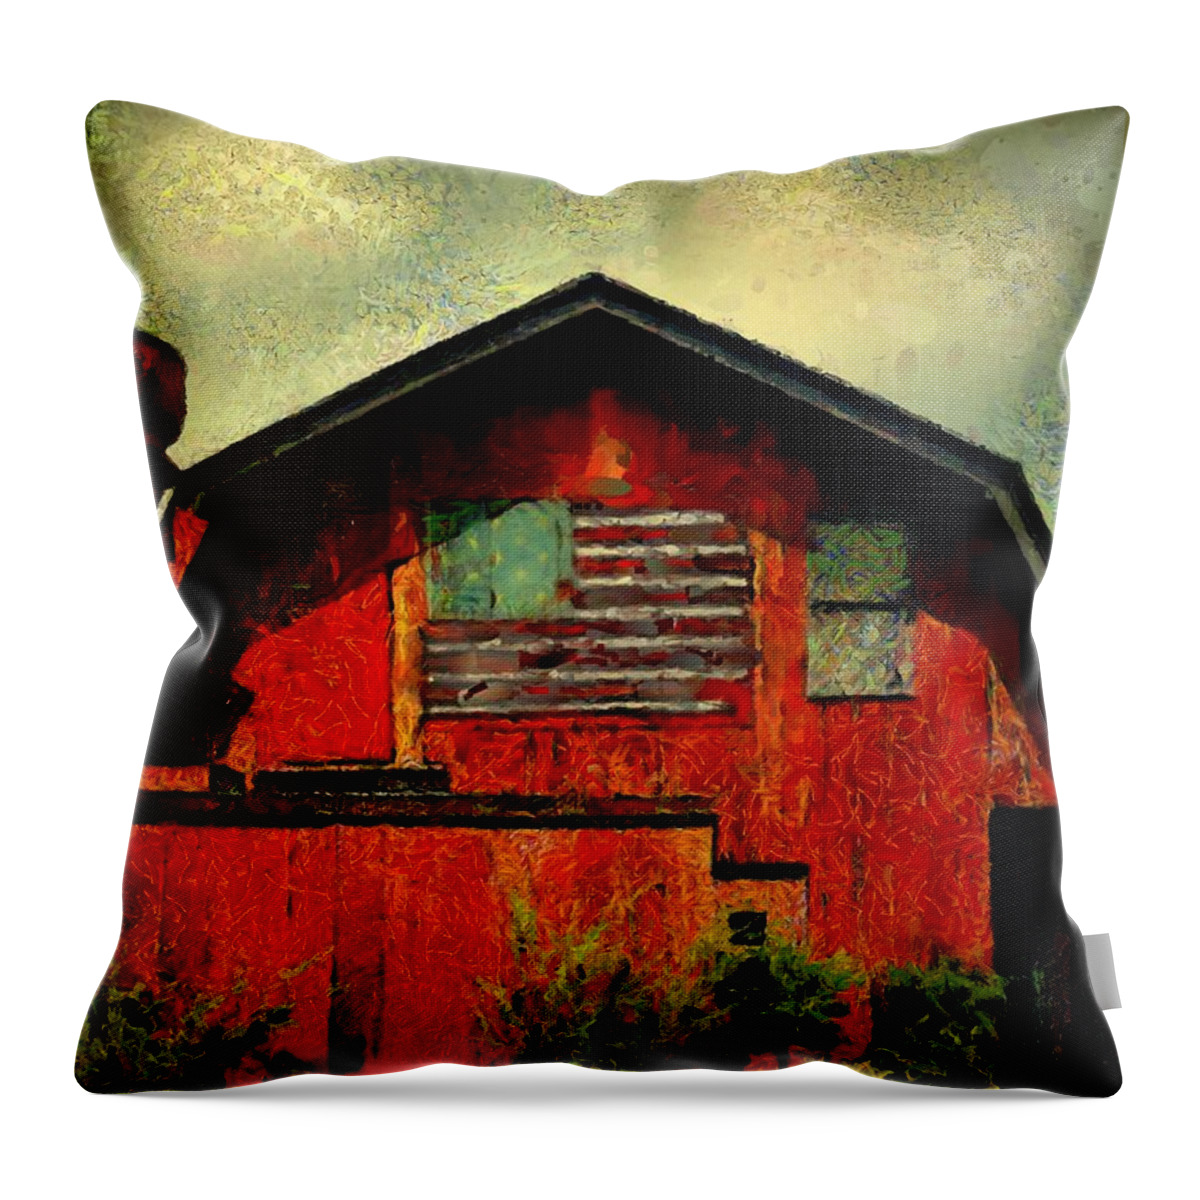 Barn Throw Pillow featuring the painting American Barn by RC DeWinter